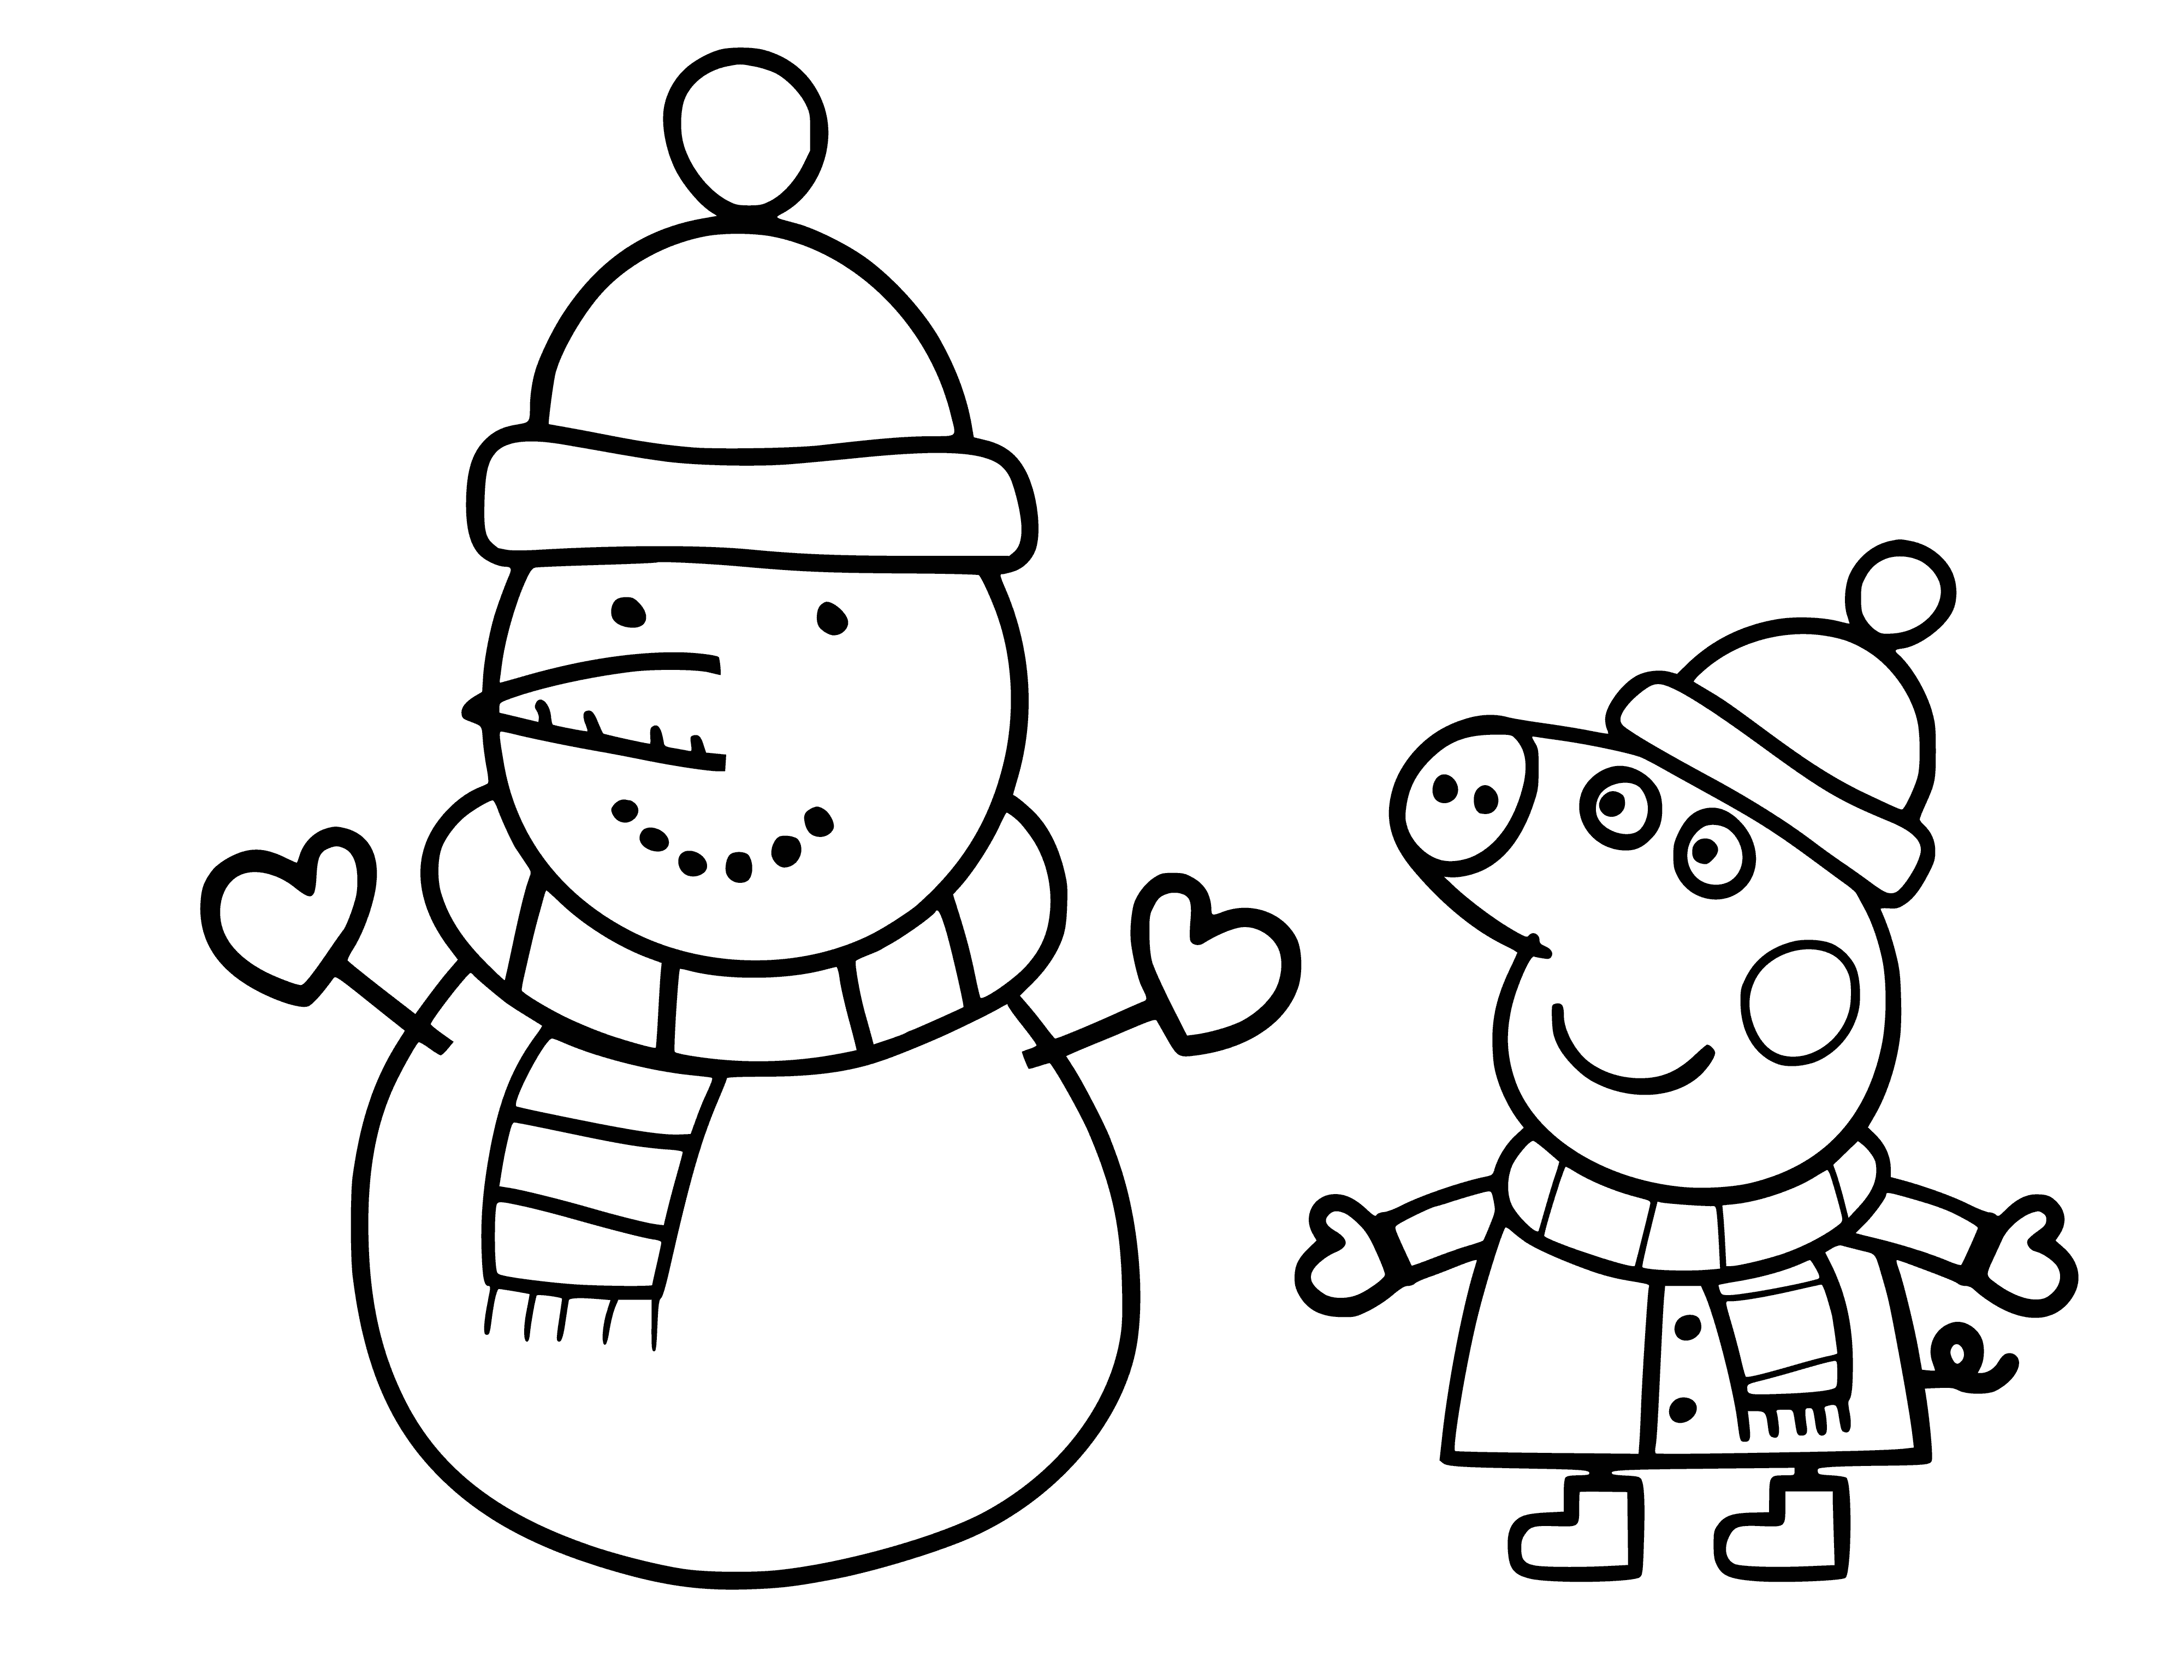 Peppa Pig and Snowman coloring page